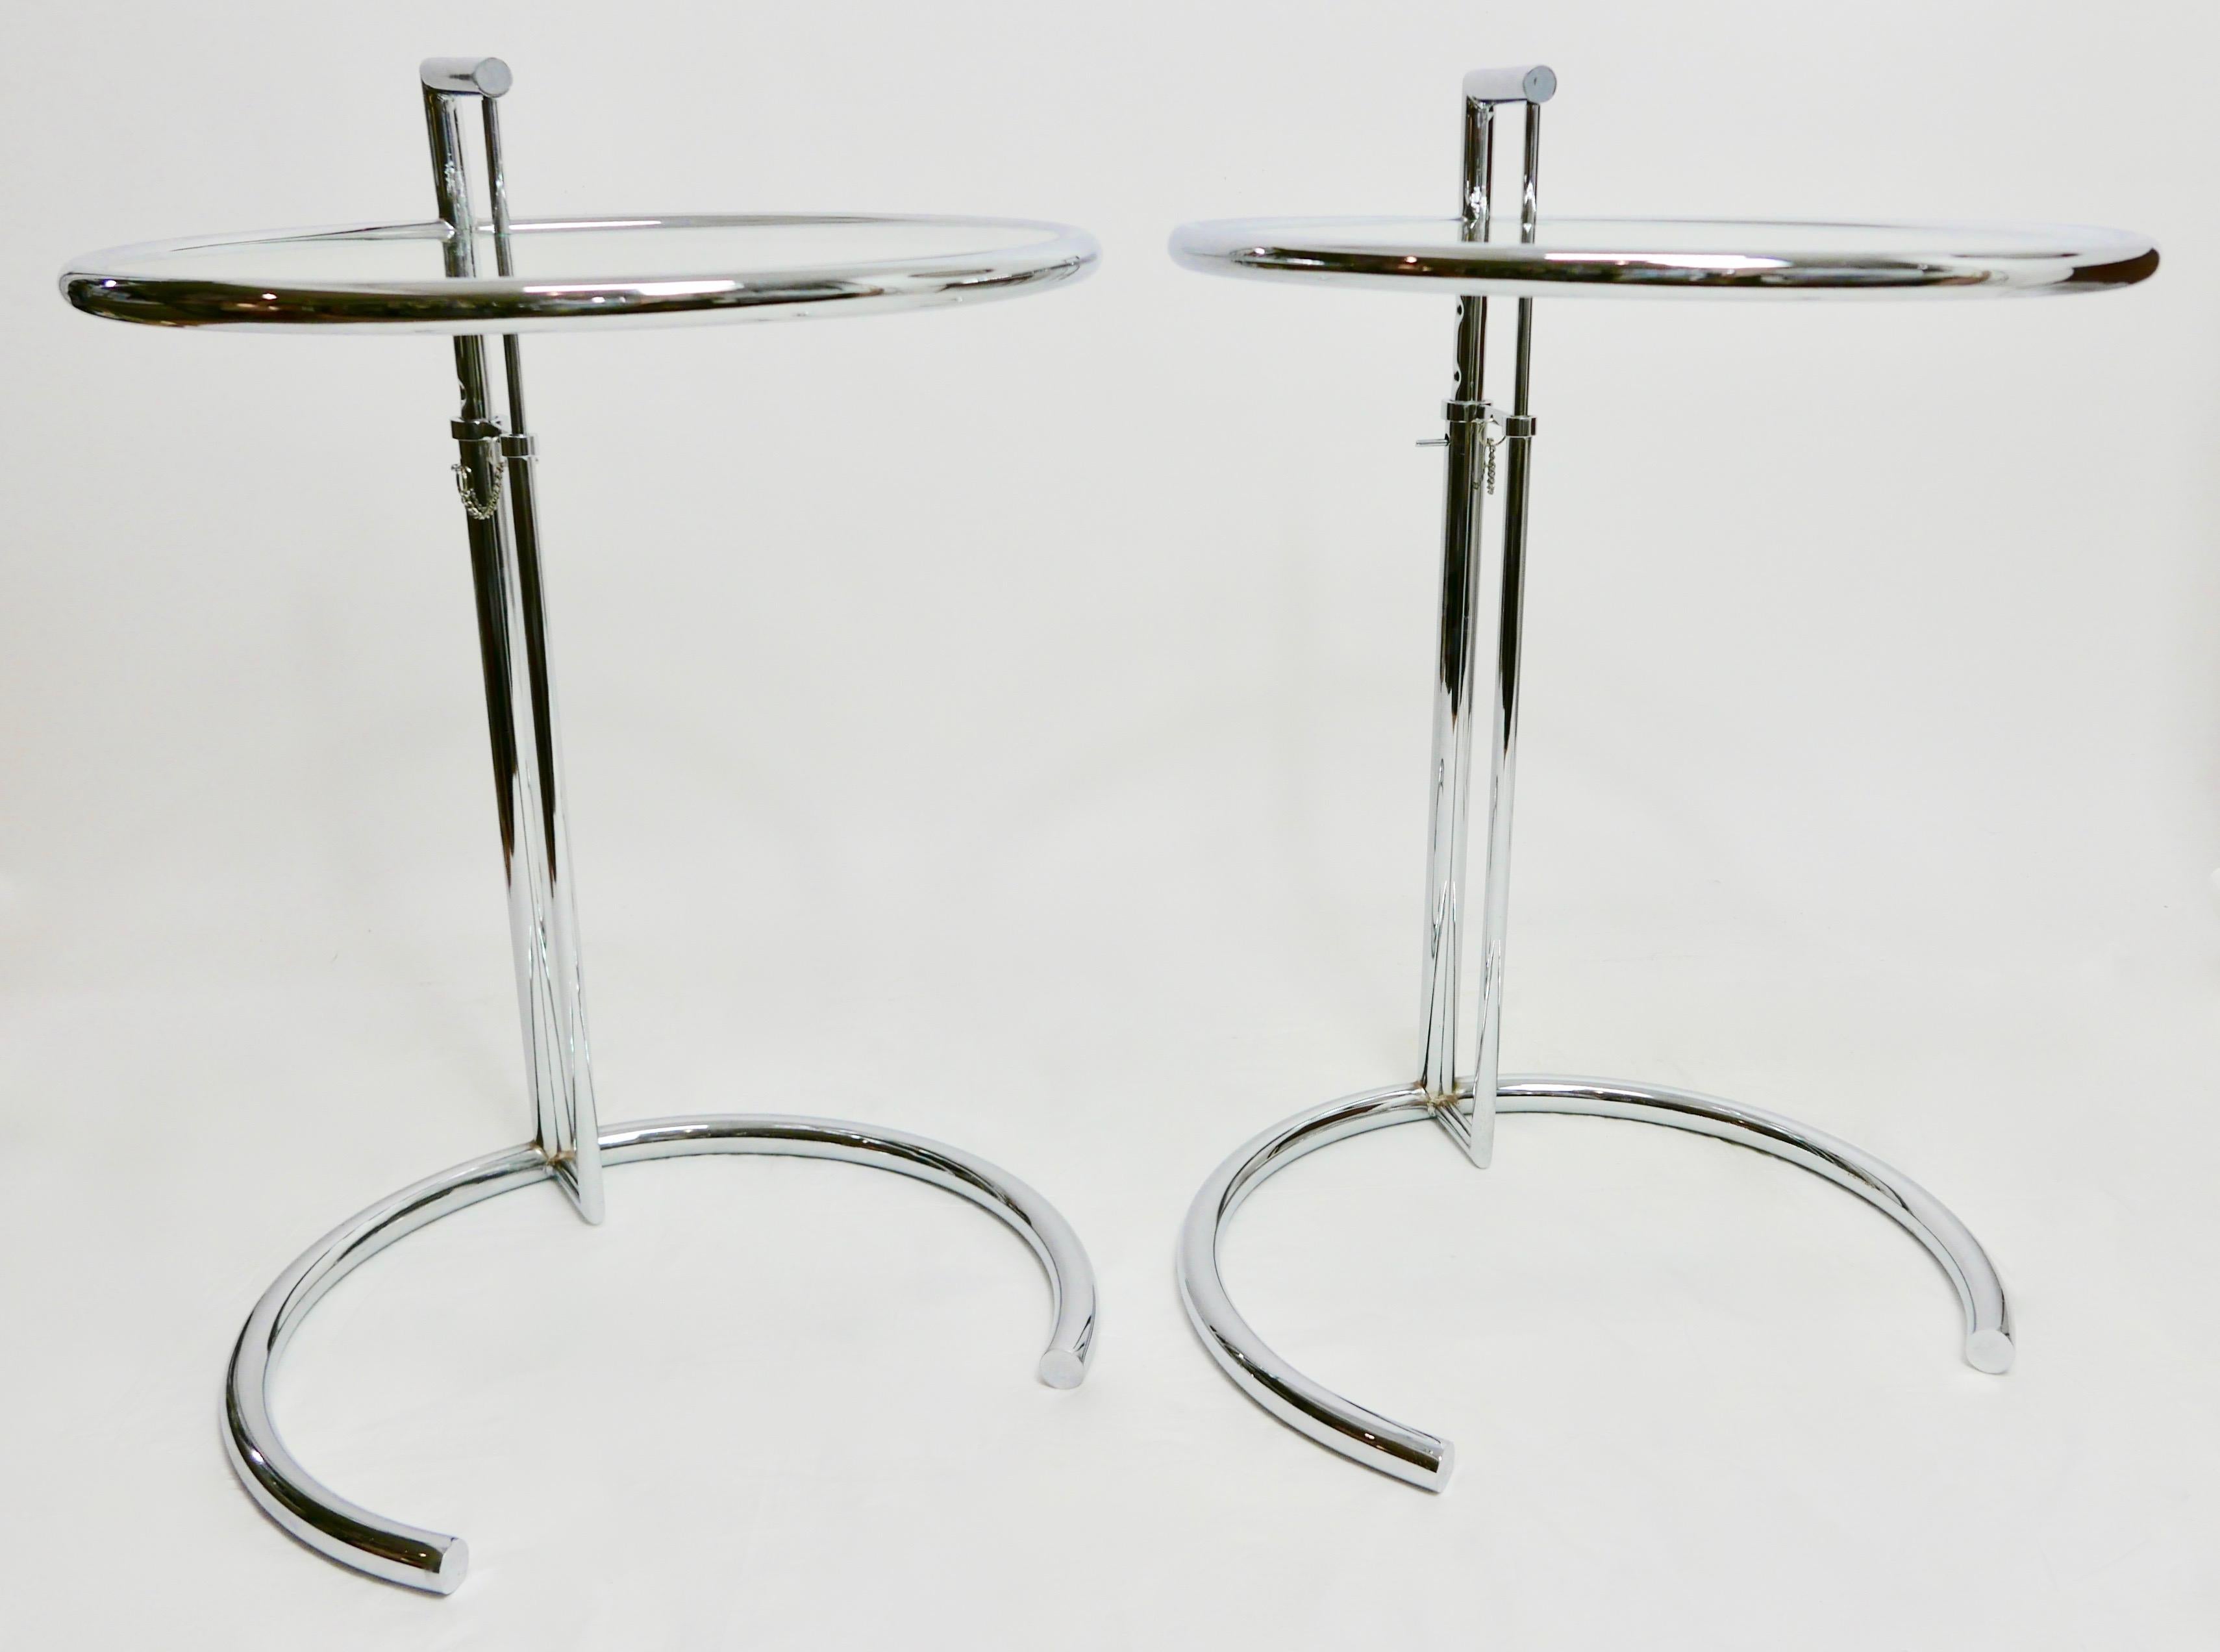 Vintage pair of Mid-Century Modern adjustable chrome metal and glass side or occasional tables in the style of Eileen Gray Model E1027
Eileen Gray was a French-based architect and furniture designer and a pioneer of the modern movement in